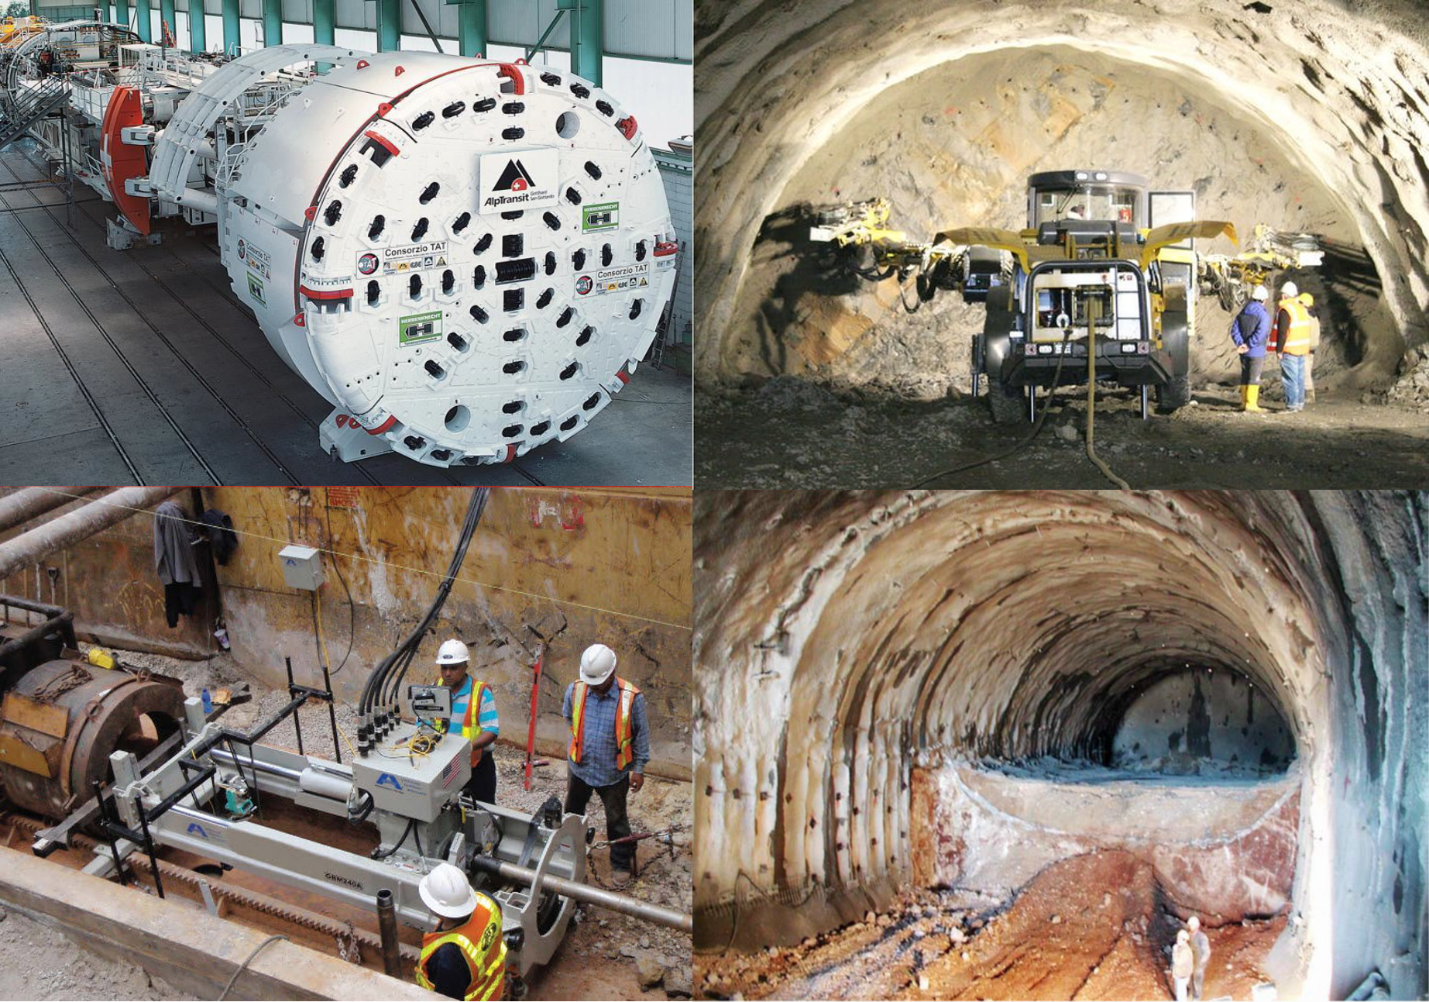 Tunneling methods (clockwise from top left): TBM, Drill and Blast, SEM and MTBM. Images obtained from Heitkampt-swiss.ch, Akkerman.com and Hoek et al., 2007.